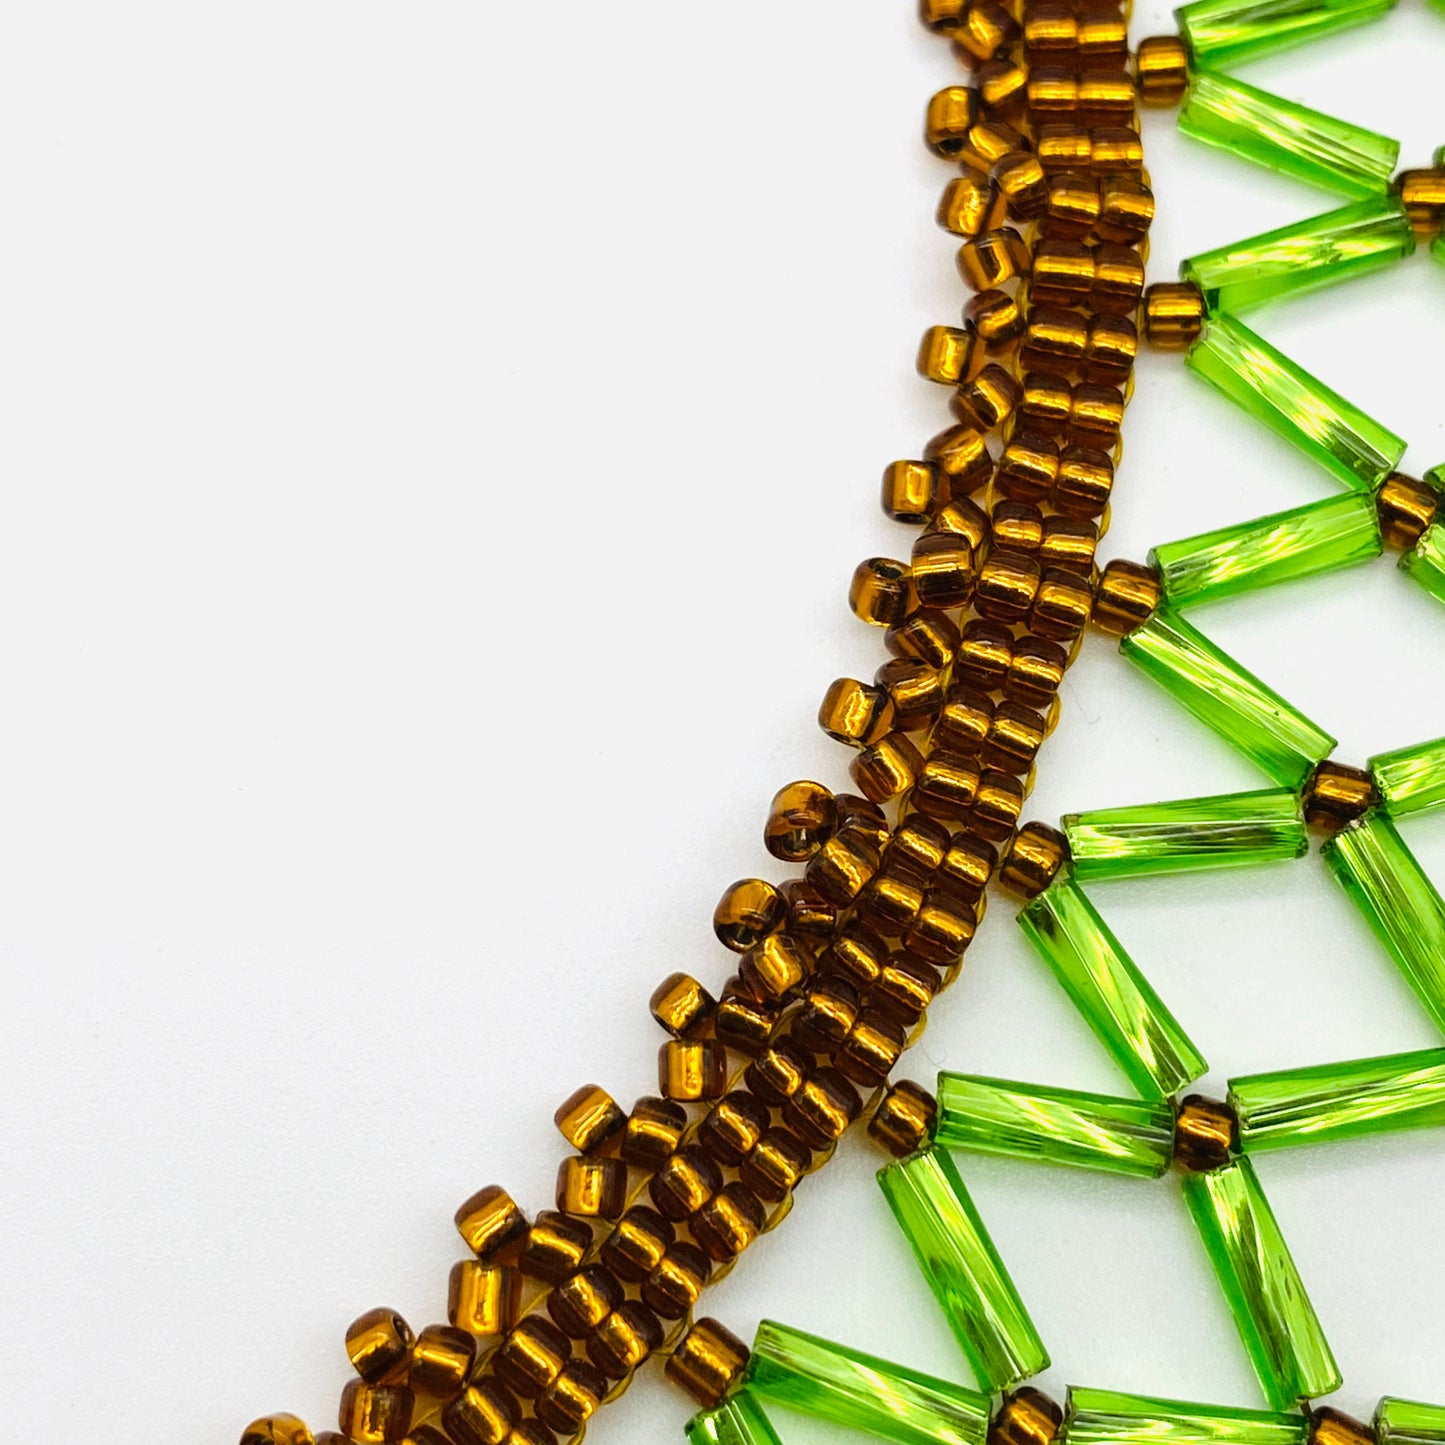 Glass Bead Webbed Choker in Sparkling Lime and Bronze Tones